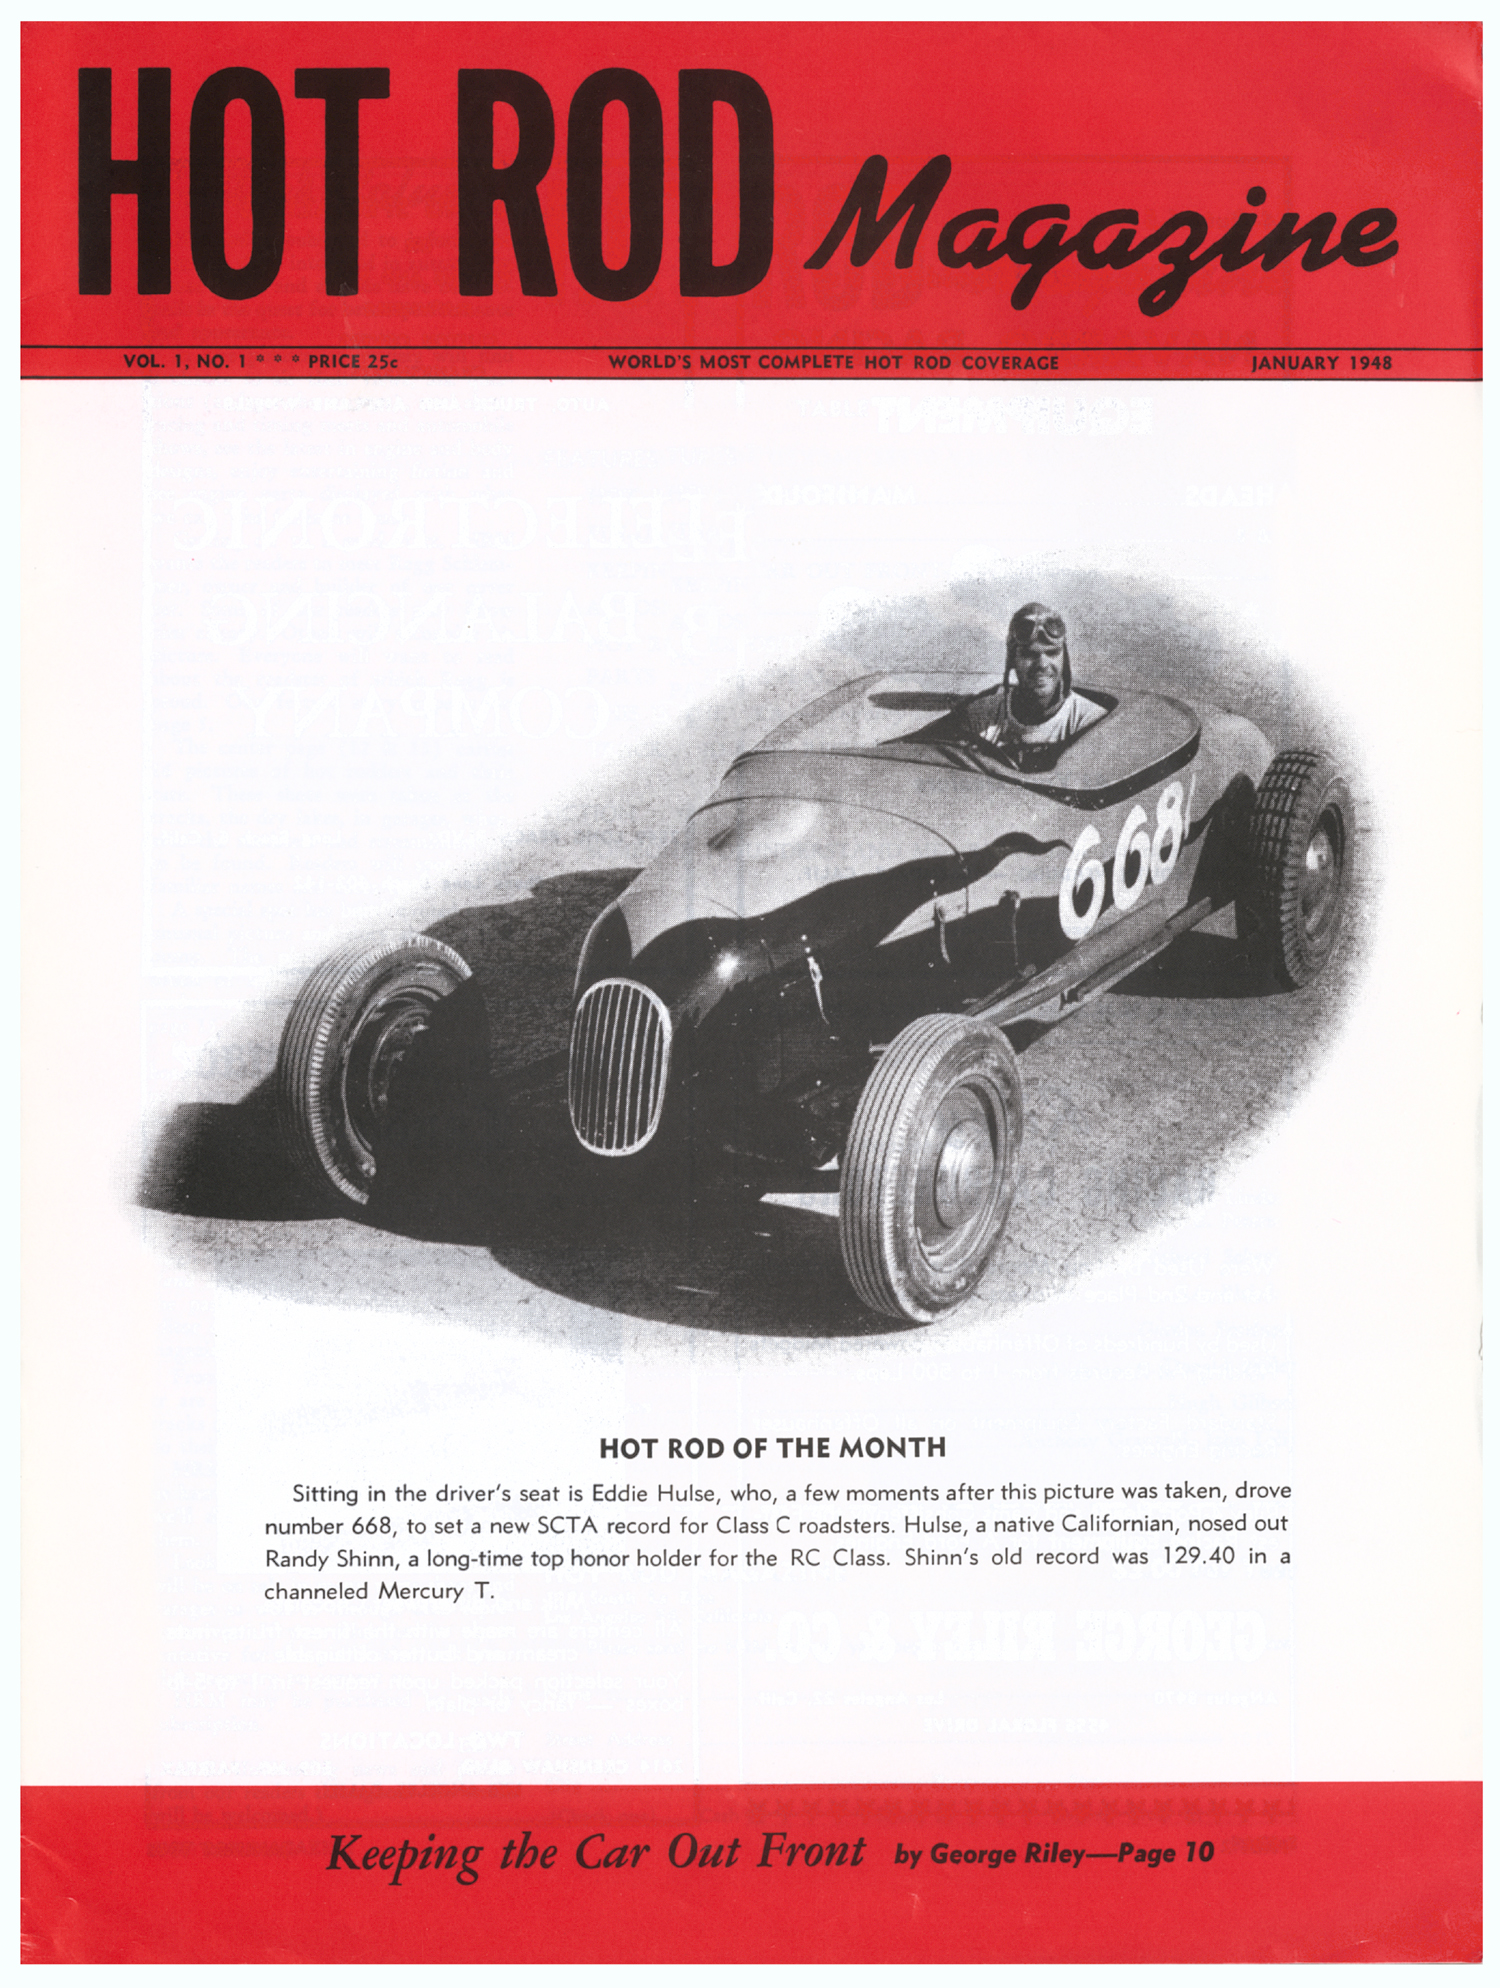 January 1948 issue of Hot Rod magazine was the first issue